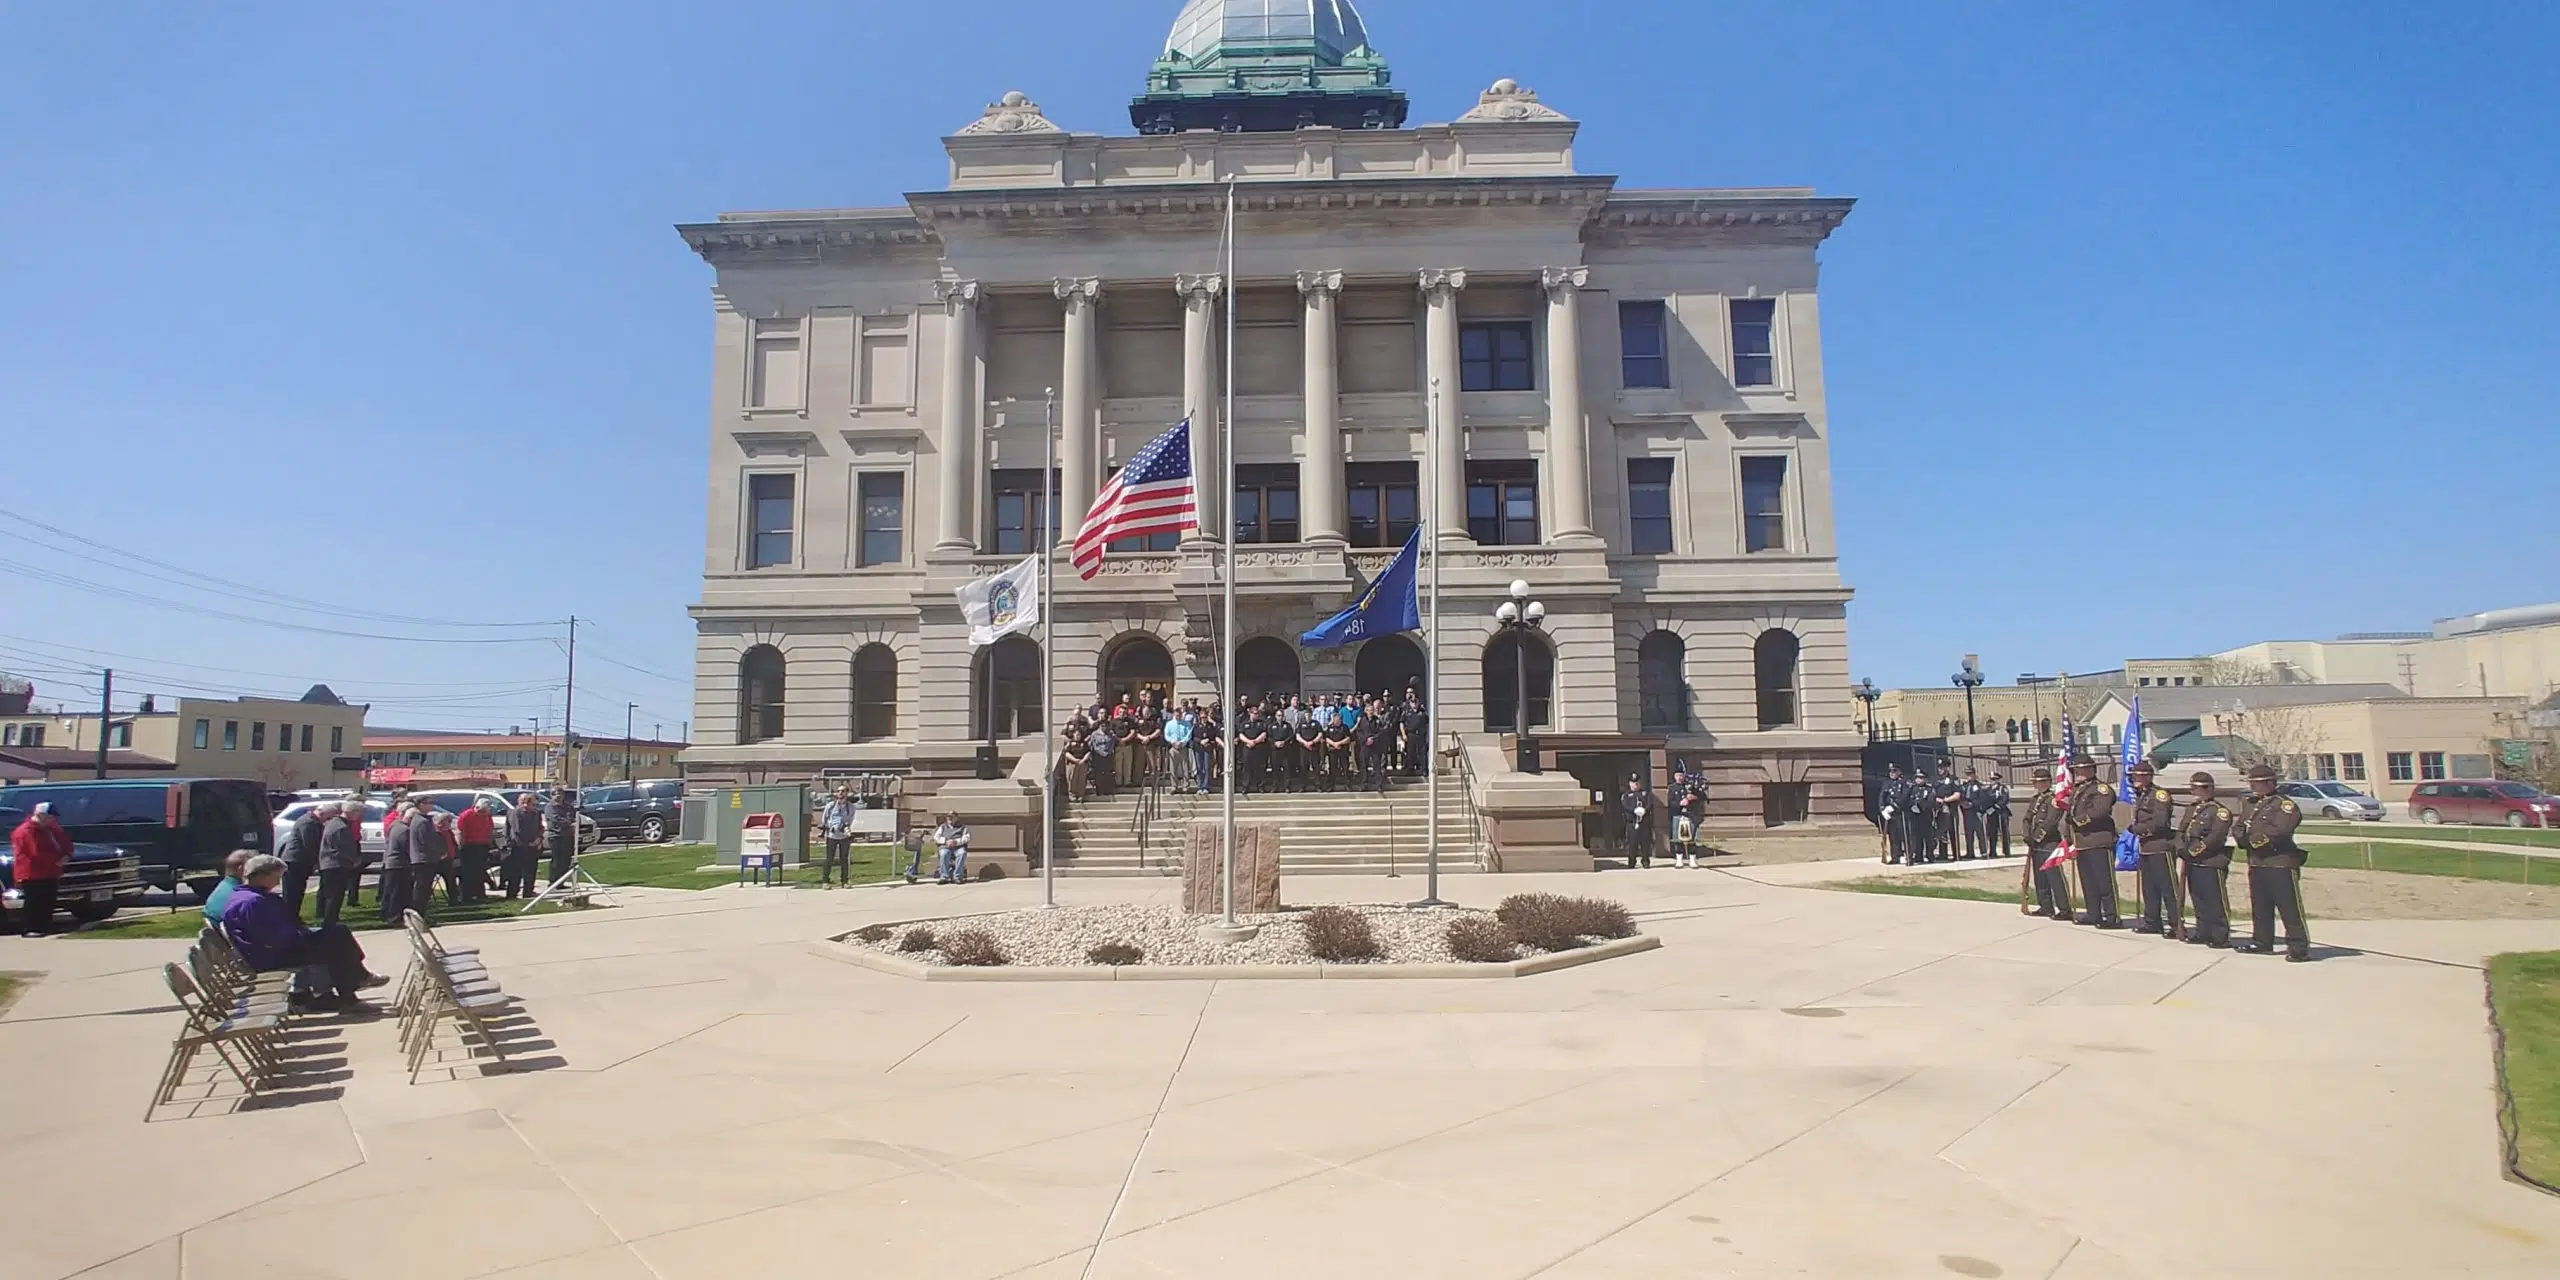 Manitowoc's Peace Officers Memorial Service